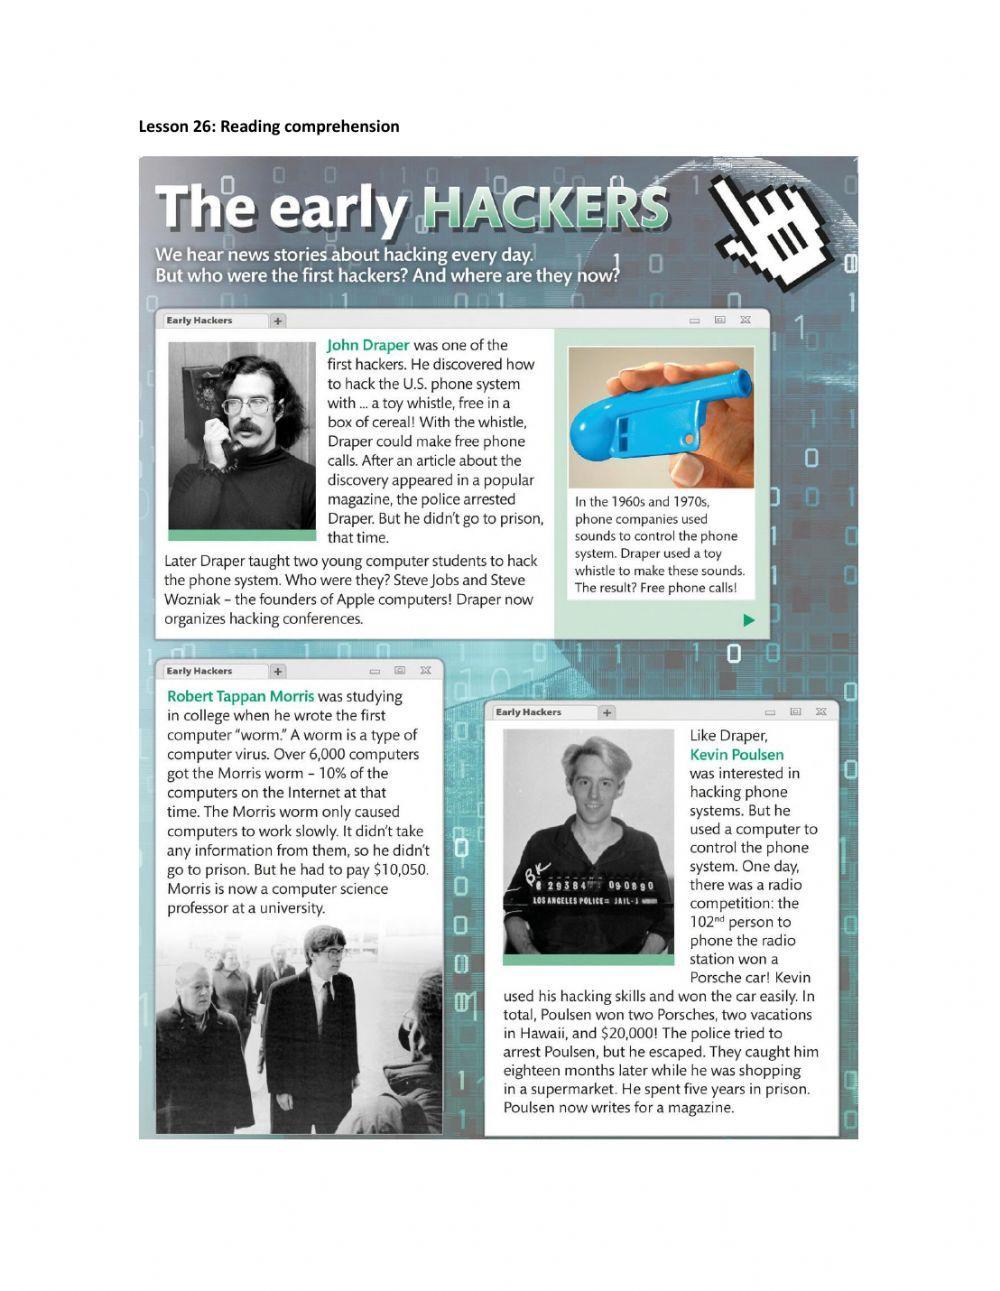 The early hackers